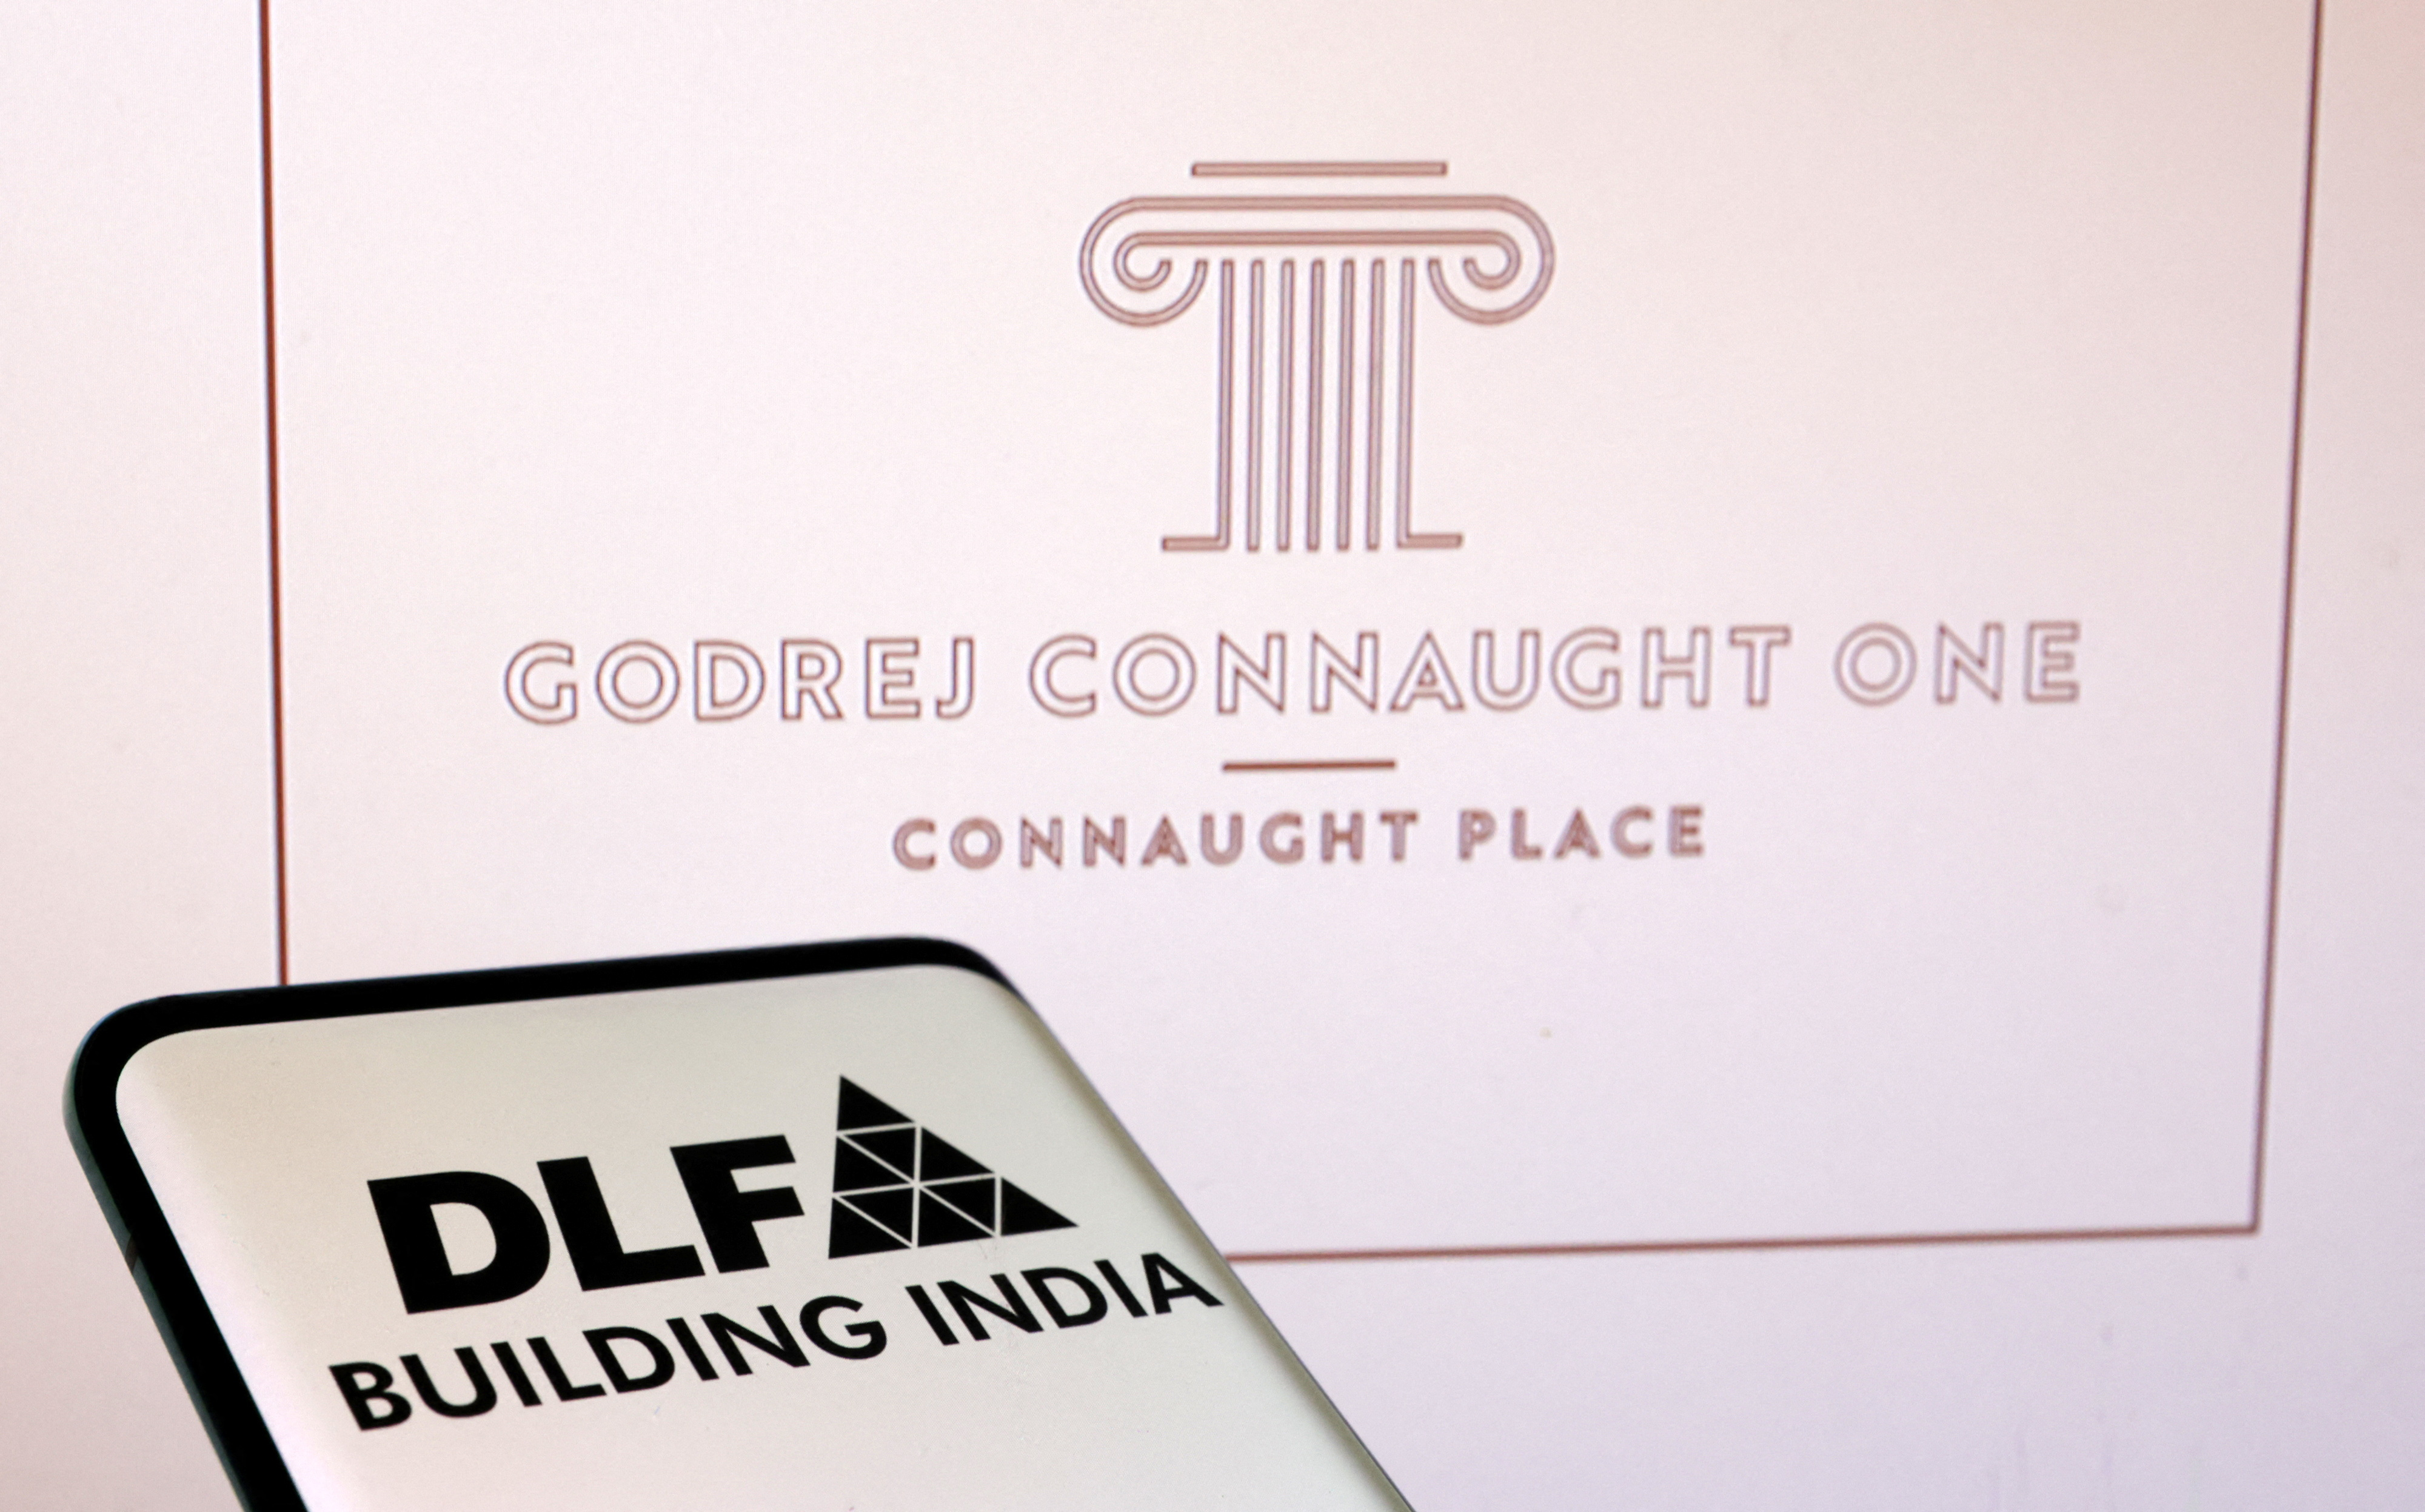 Illustration shows DLF and Godrej Connaught One logos